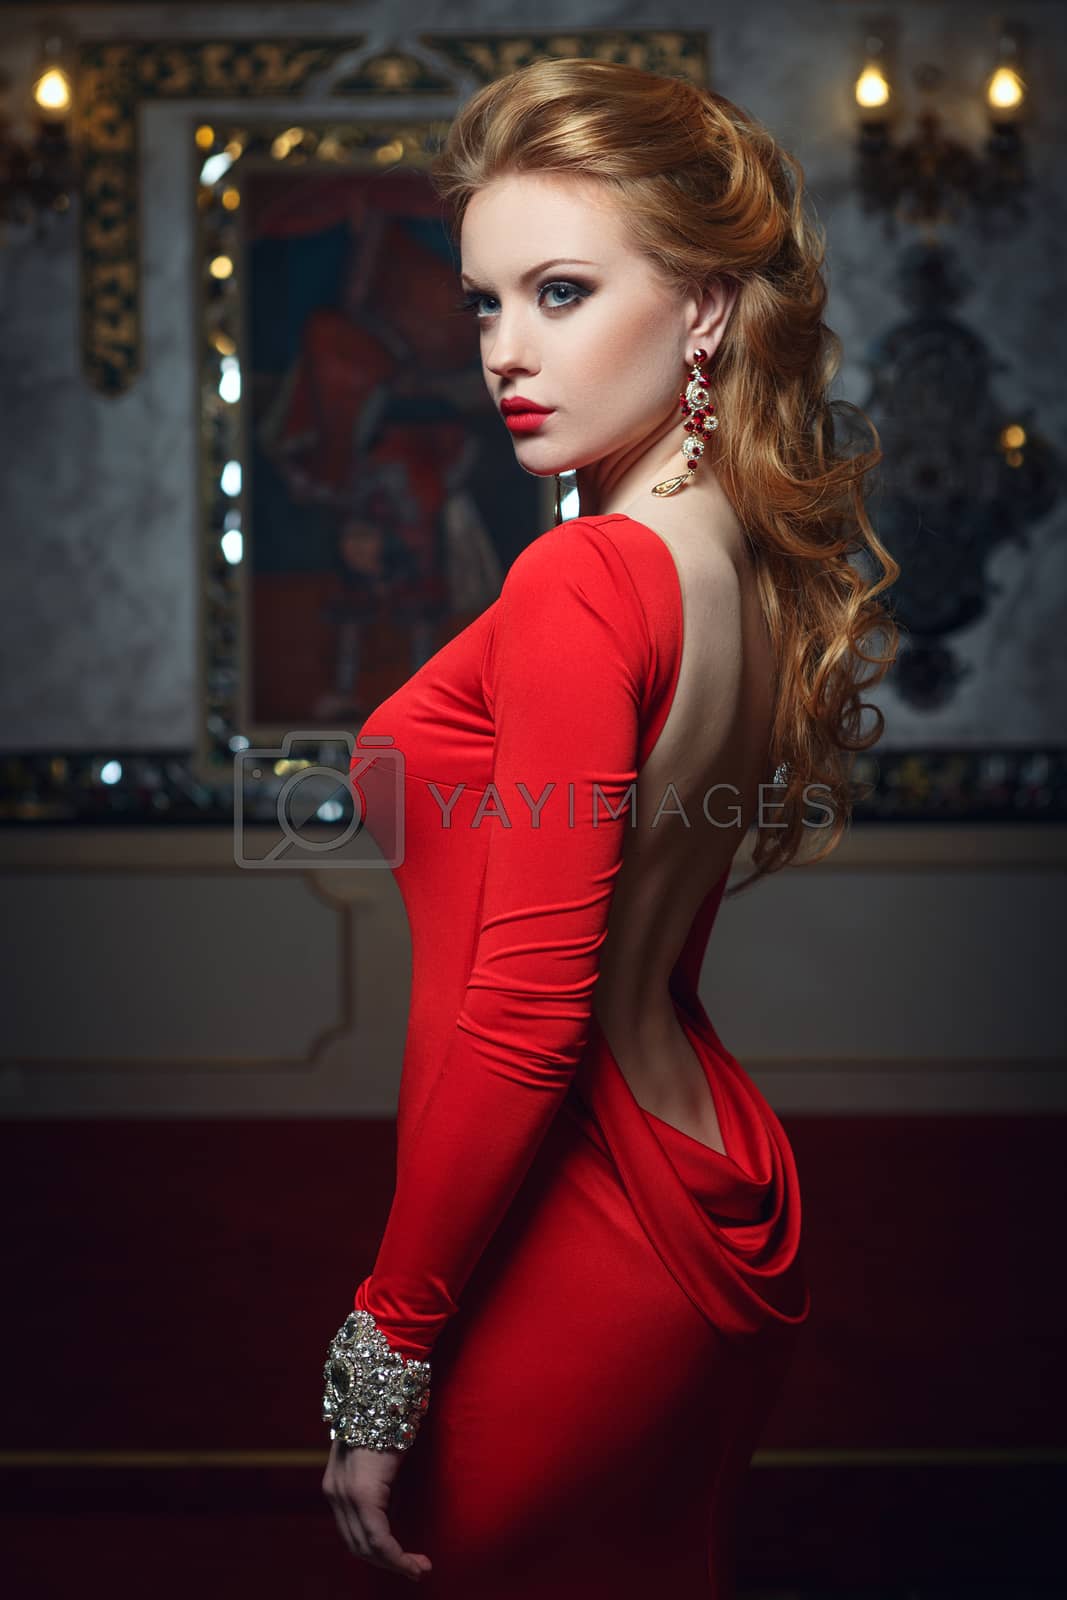 Royalty free image of Fashion portrait of young magnificent woman in red dress by fotoatelie